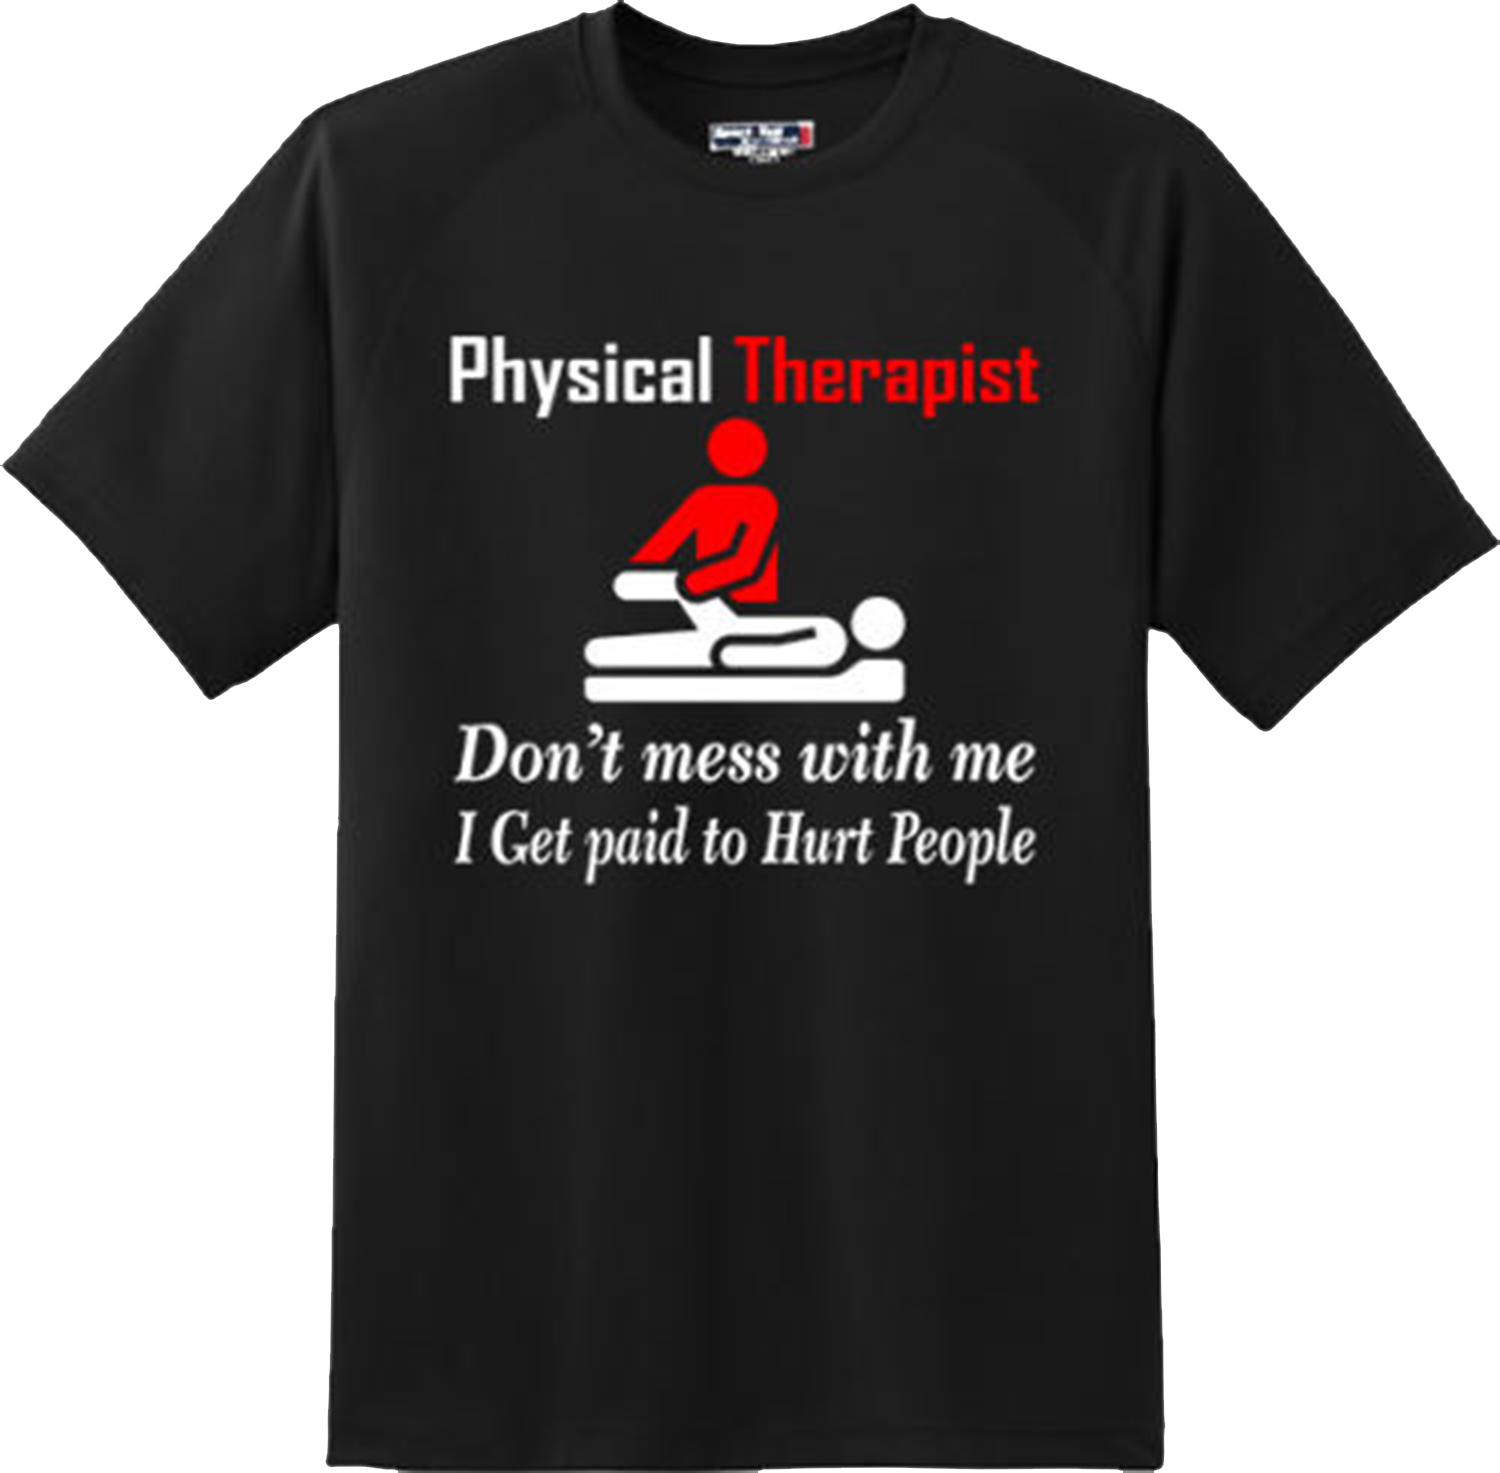 Funny Physical Therapist Don't mess with me Humor T Shirt New Graphic Tee